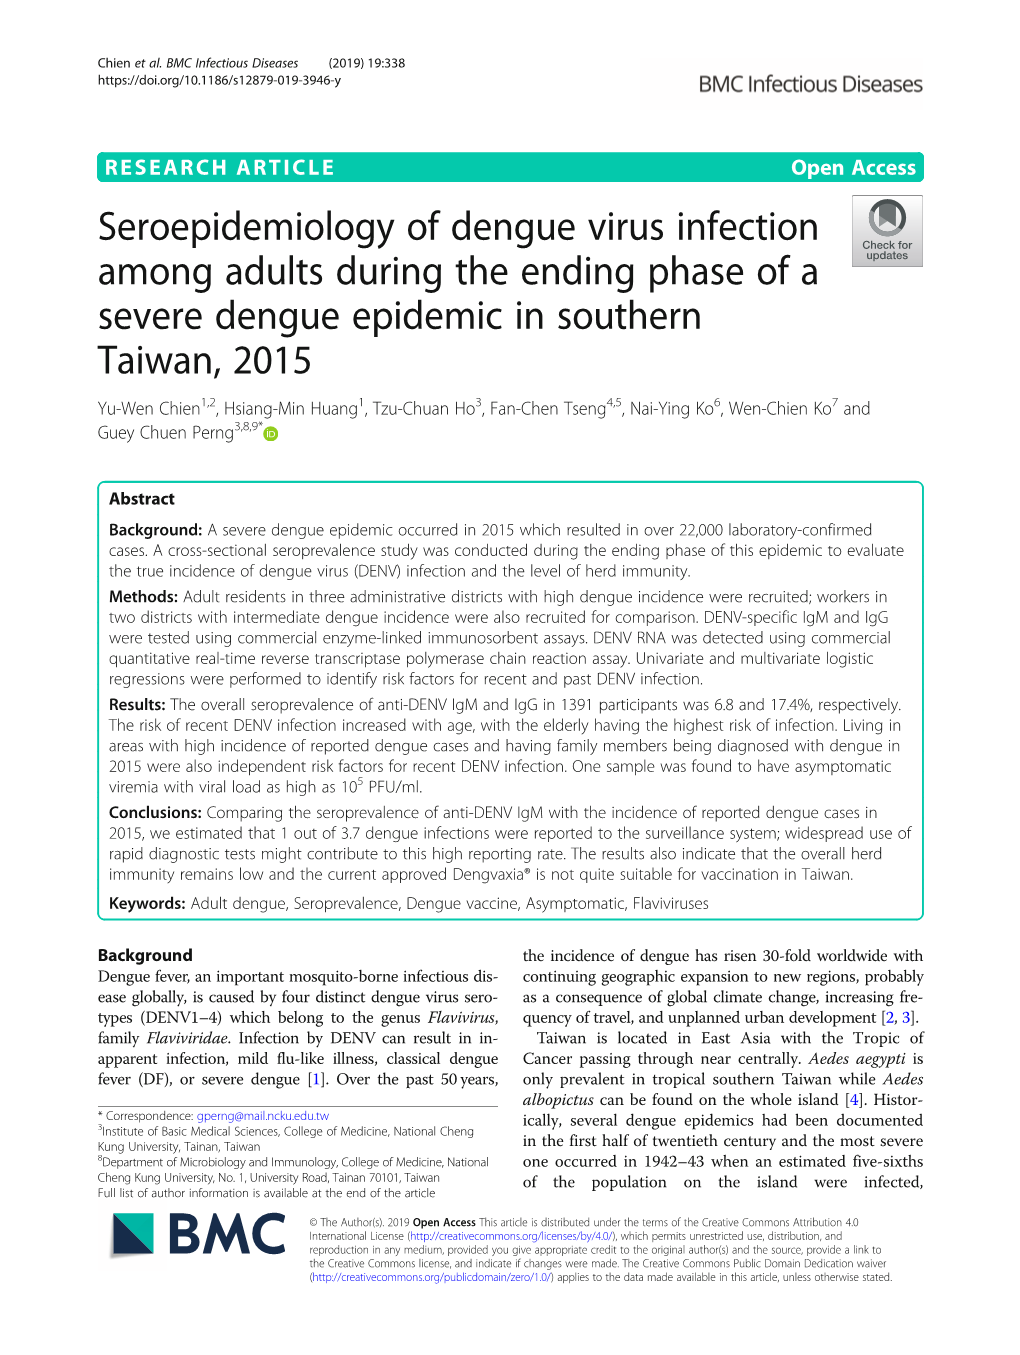 Seroepidemiology of Dengue Virus Infection Among Adults During the Ending Phase of a Severe Dengue Epidemic in Southern Taiwan